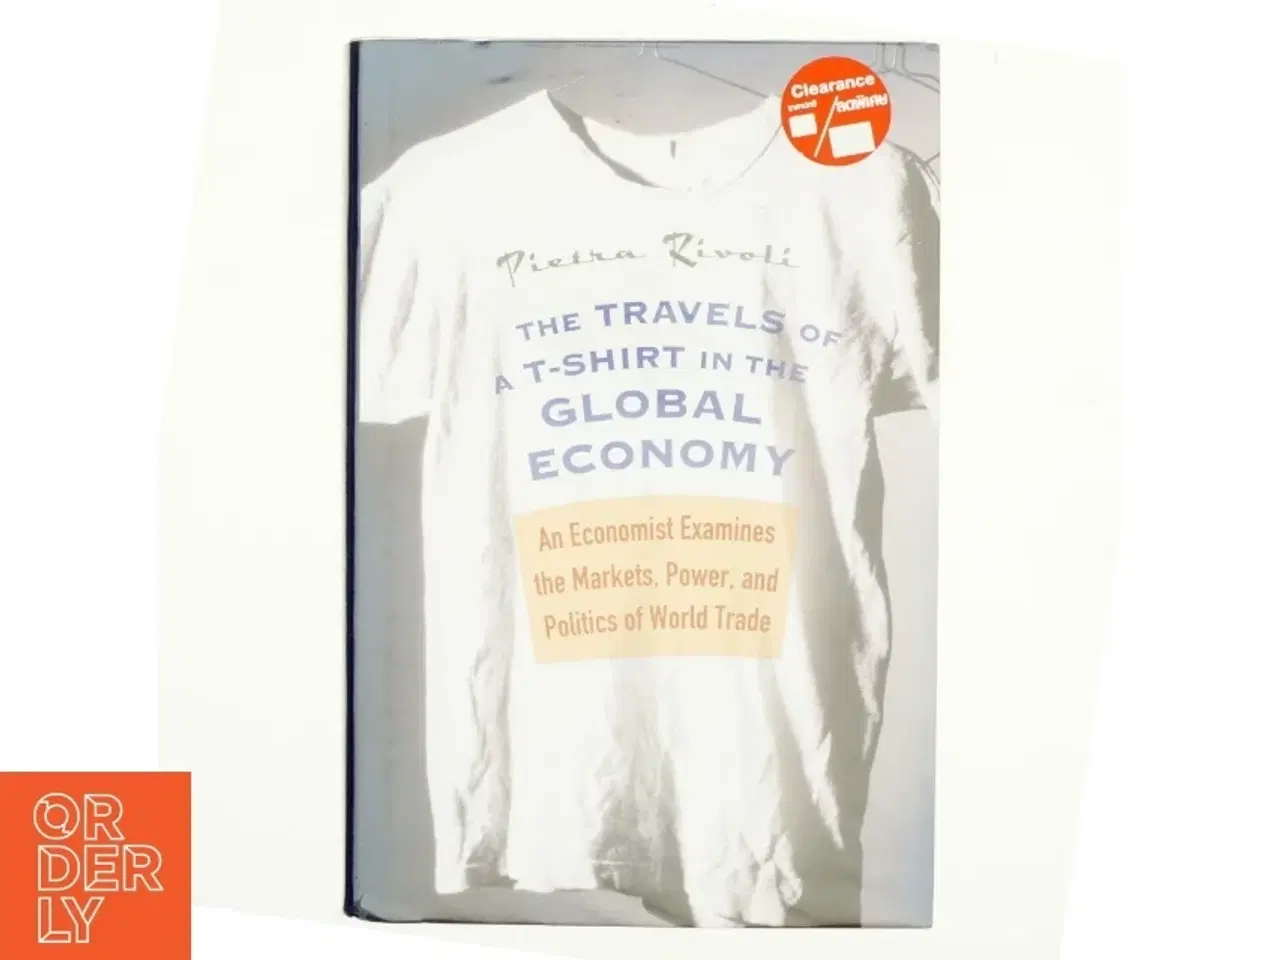 Billede 1 - The Travels of a T-Shirt in the Global Economy : An Economist Examines the Markets, Power and Politics of World Trade af Pietra Rivoli (Bog)